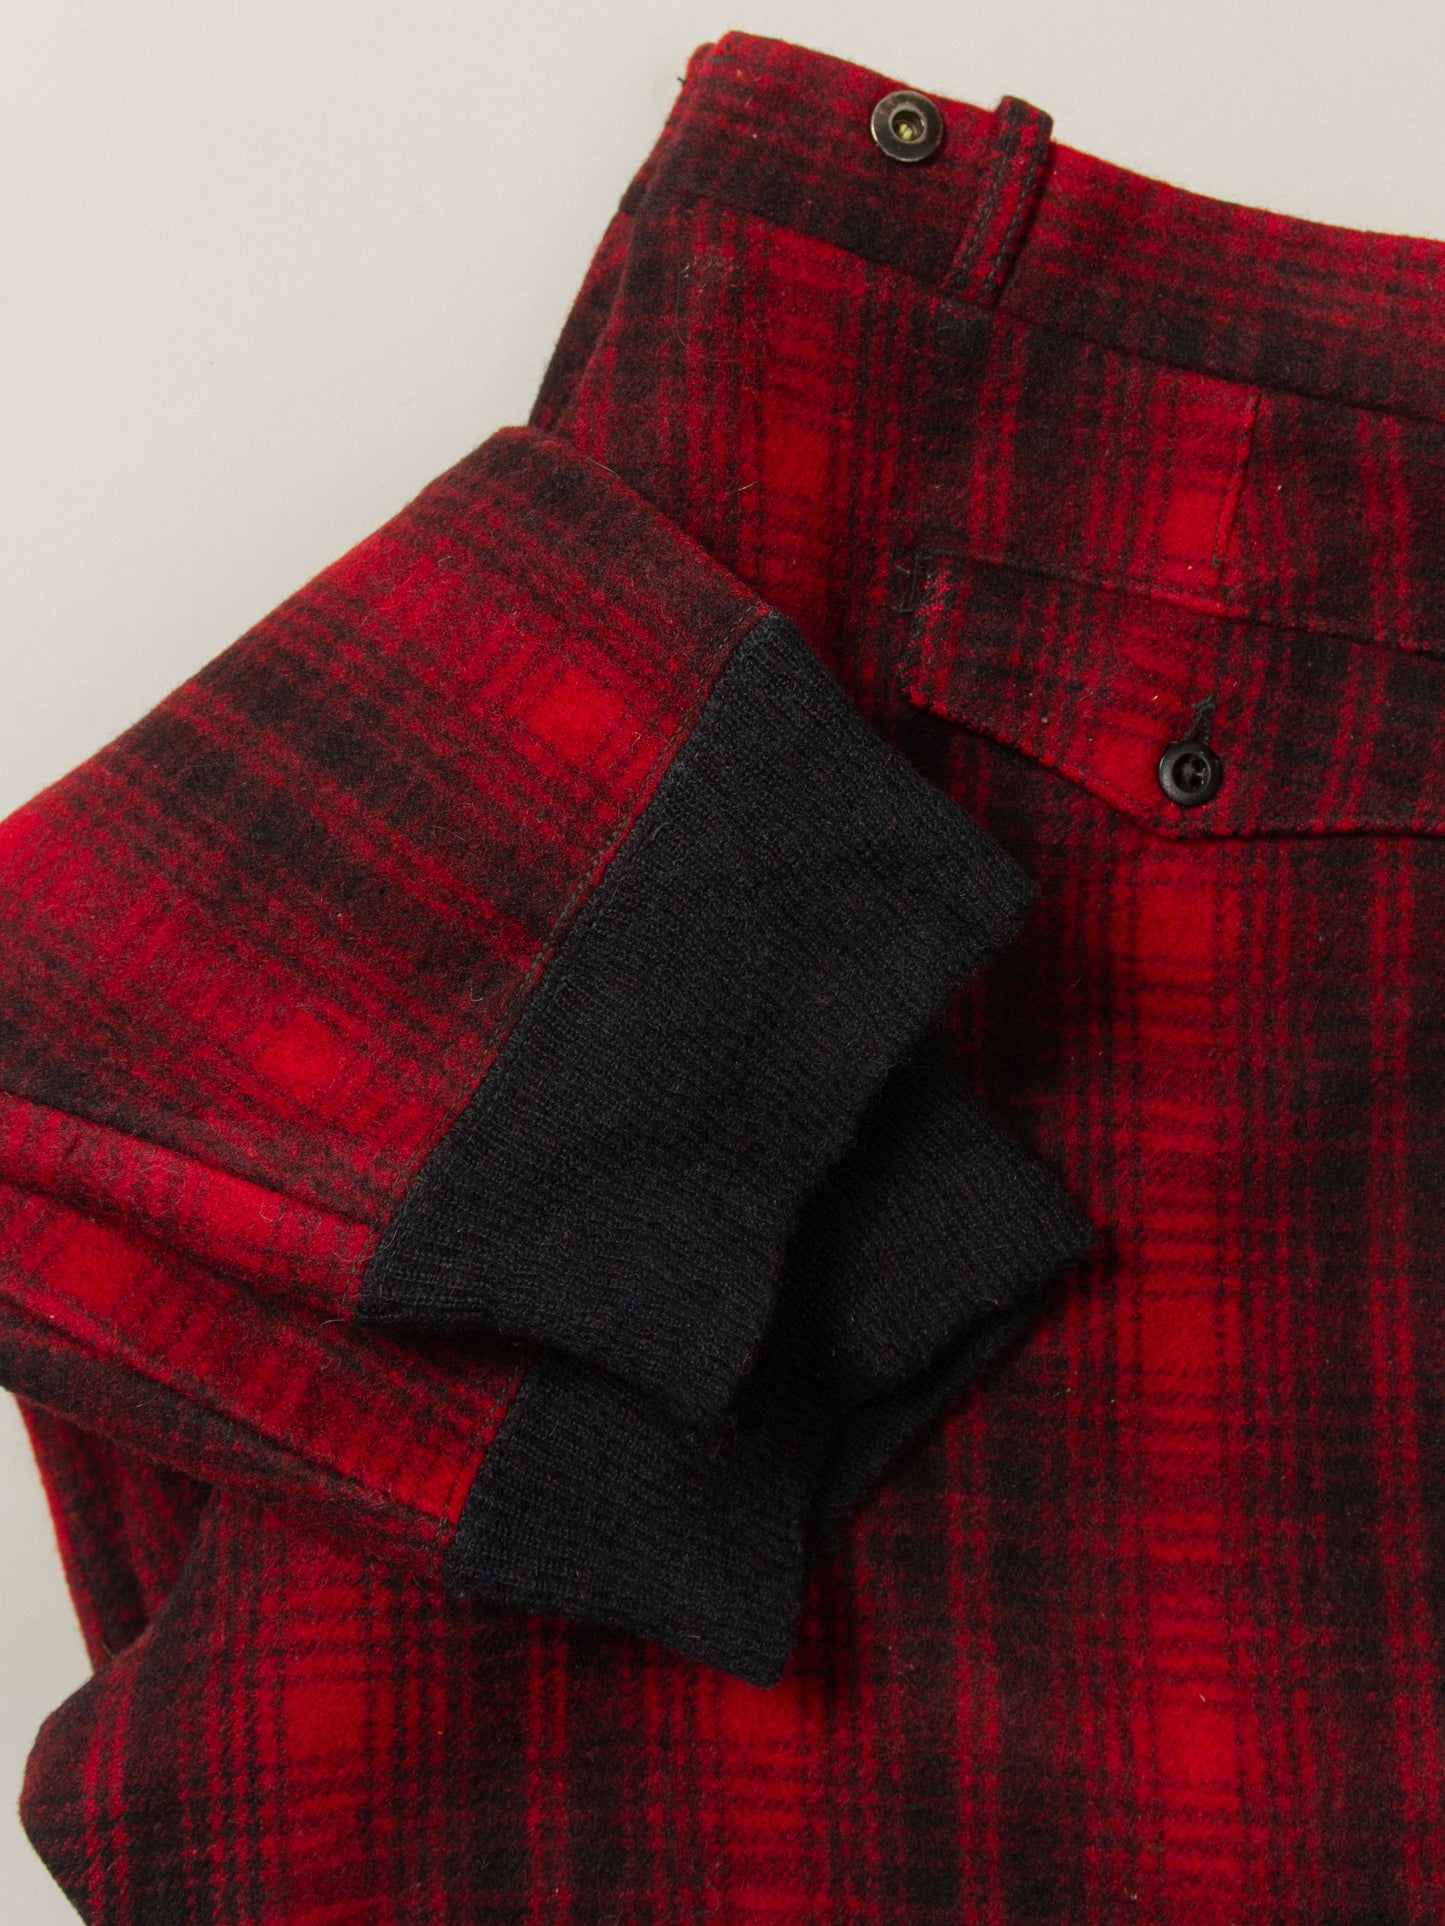 Vtg 1950s Woolrich Buffalo Plaid Trousers - Made in USA (38x31)